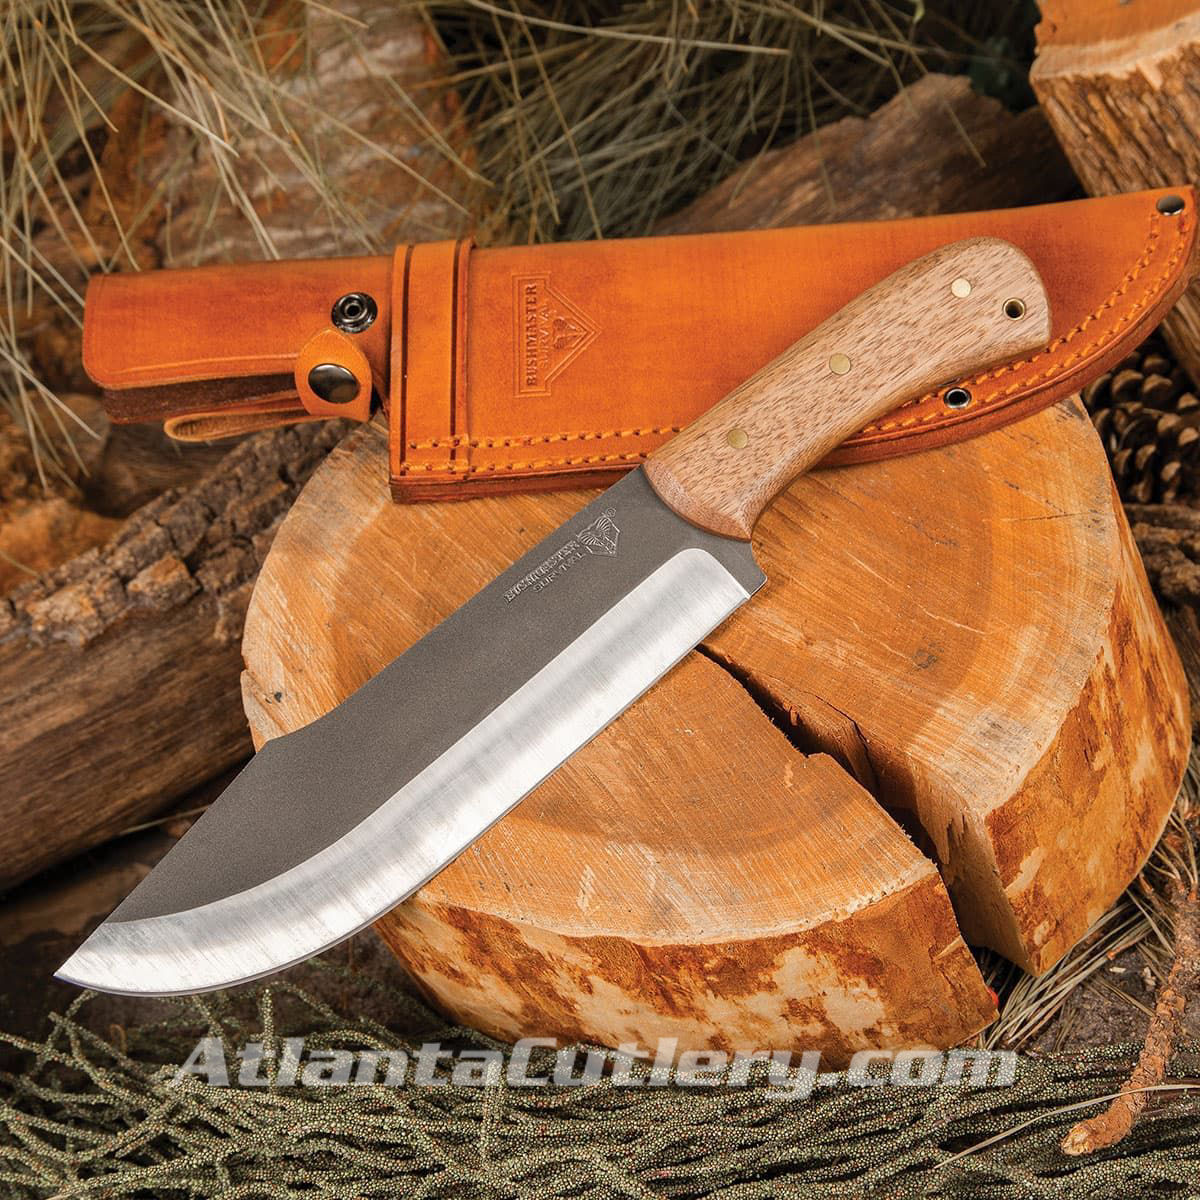 Bushmaster Butcher Bowie Knife has sharp full-tang, clip point blade, hardwood scales, brass pins, lanyard hole, leather sheath